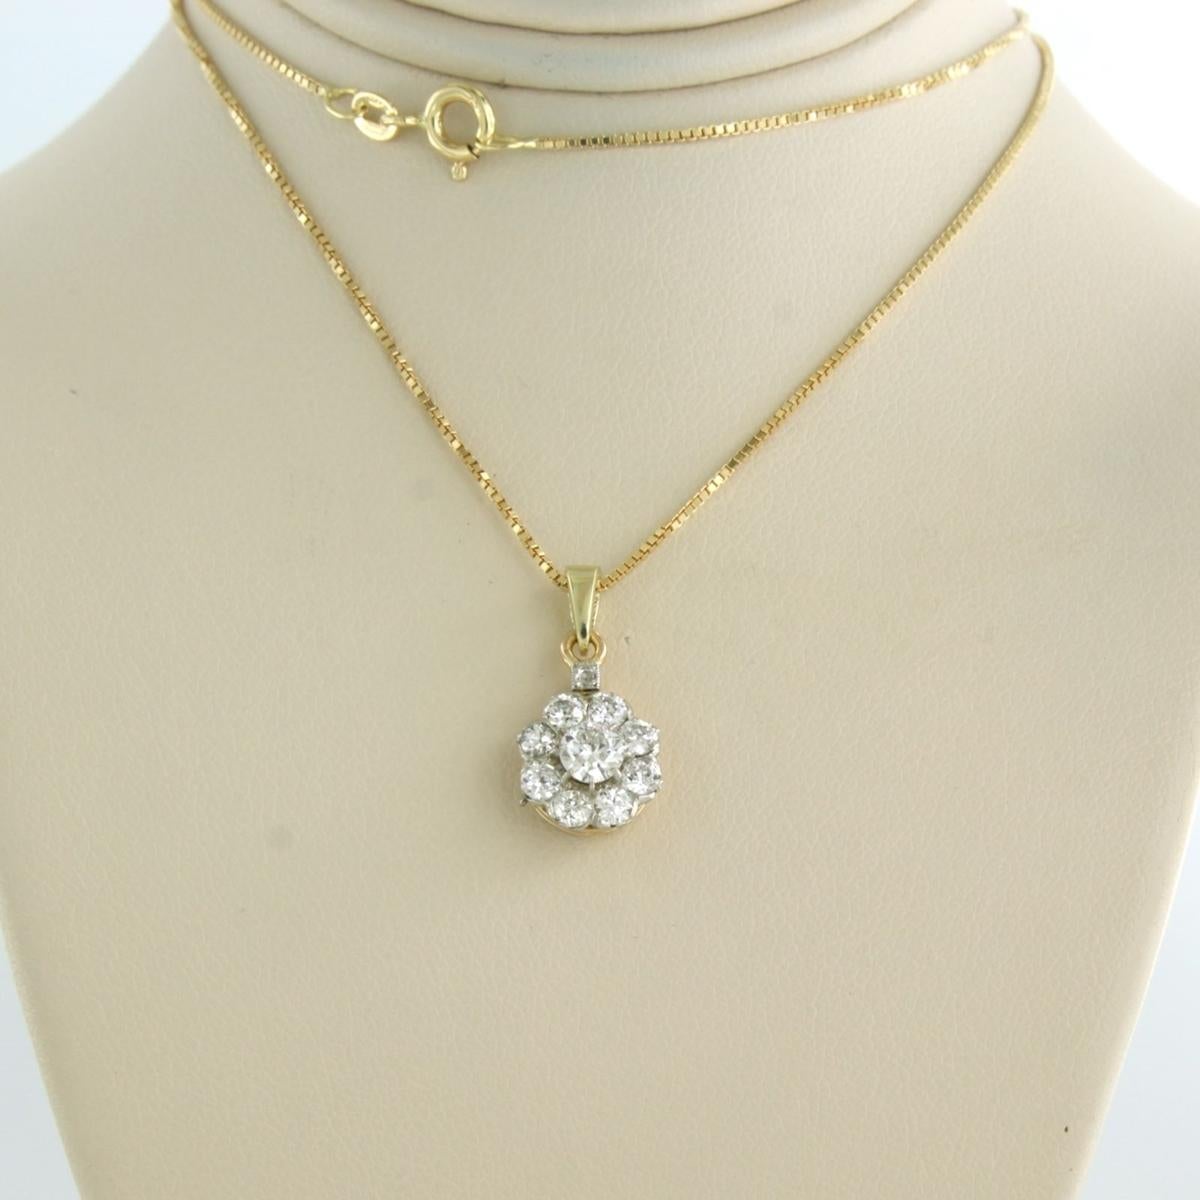 Necklace with pendant set with Diamonds 18k gold